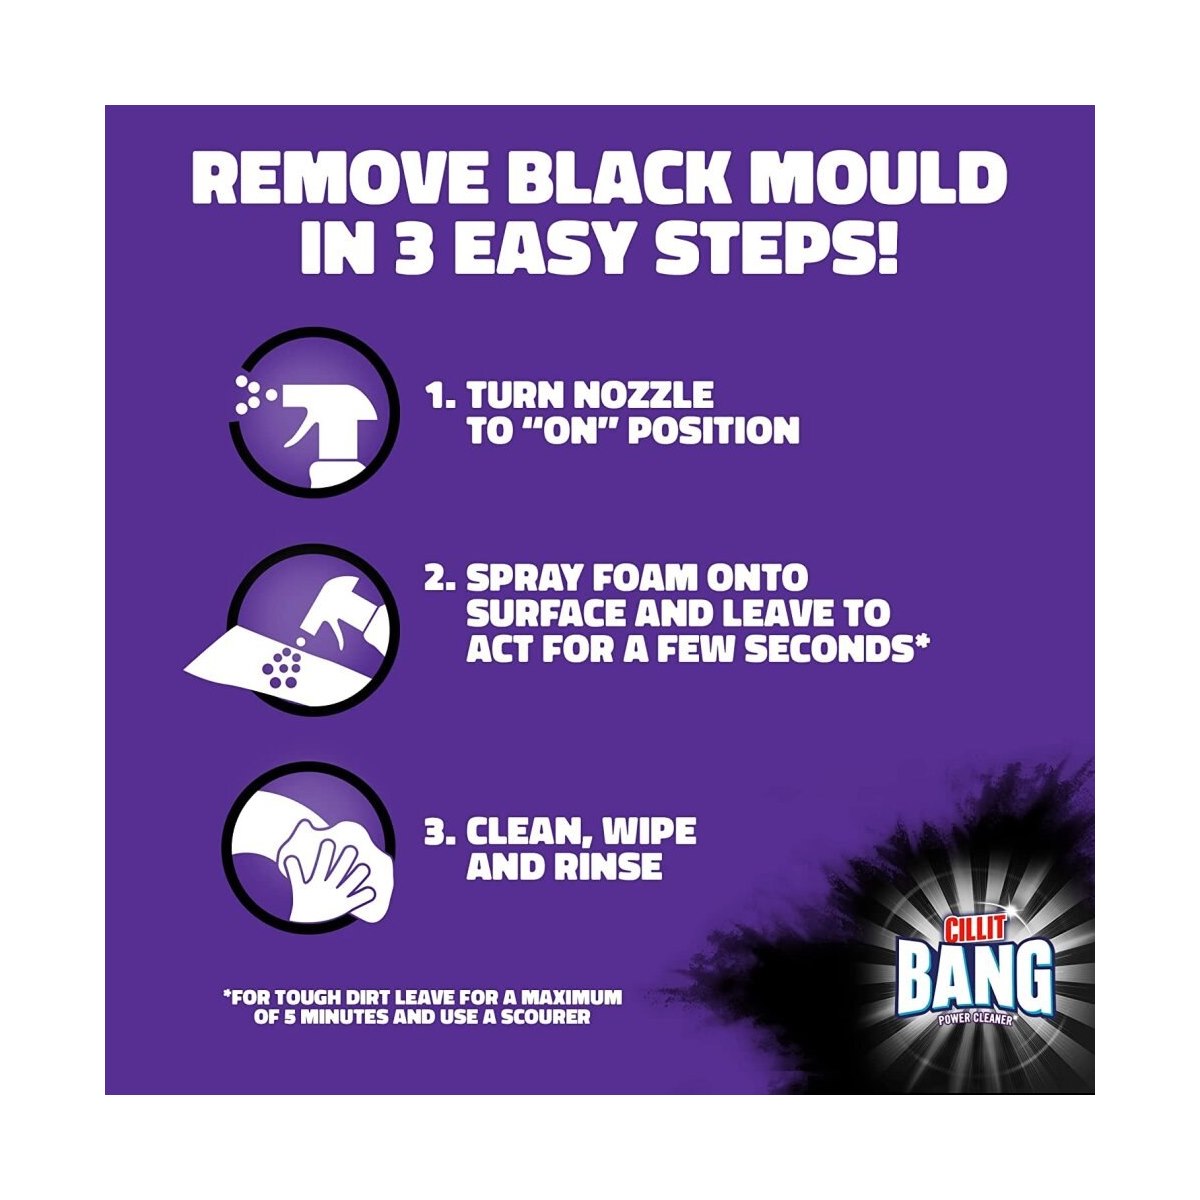 How to Use Cillit Bang Black Mould Remover